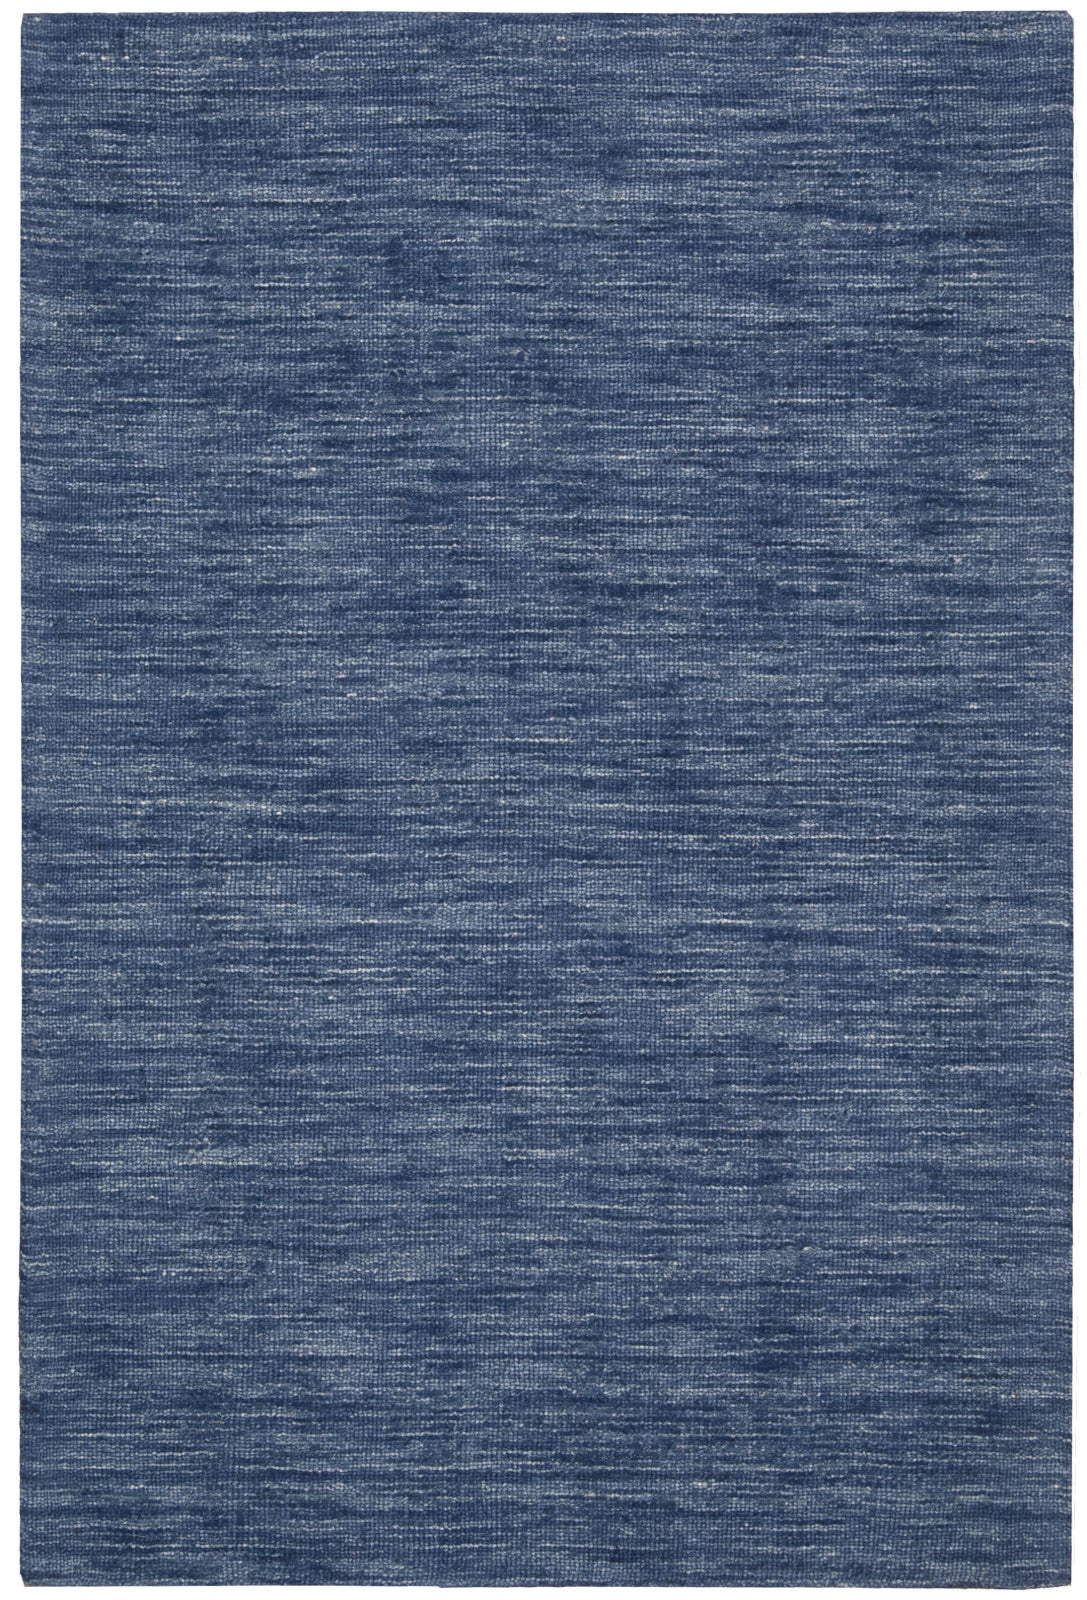 Nourison Grand Suite WGS01 Ocean Area Rug by Waverly